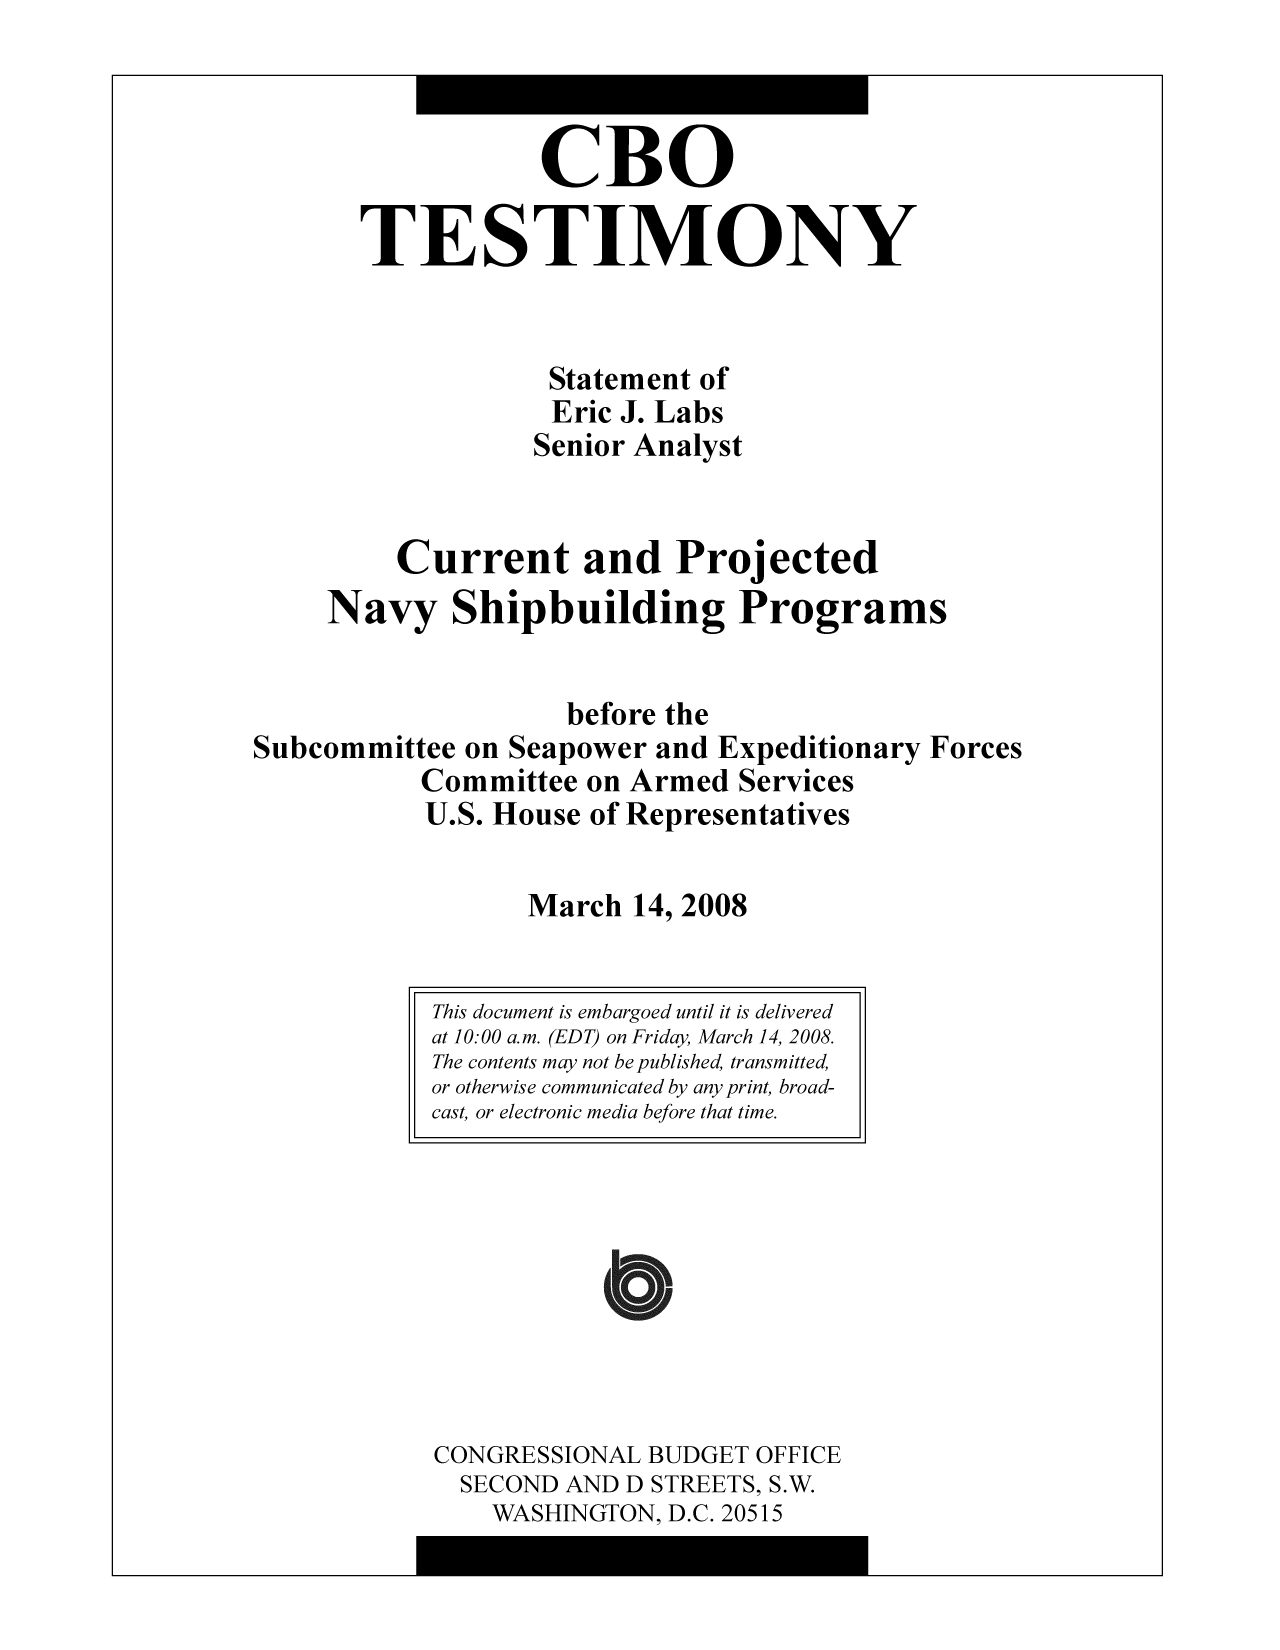 handle is hein.congrec/cbo9765 and id is 1 raw text is: CBO
TESTIMONY
Statement of
Eric J. Labs
Senior Analyst
Current and Projected
Navy Shipbuilding Programs
before the
Subcommittee on Seapower and Expeditionary Forces
Committee on Armed Services
U.S. House of Representatives
March 14, 2008

CONGRESSIONAL BUDGET OFFICE
SECOND AND D STREETS, S.W.
WASHINGTON, D.C. 20515

This document is embargoed until it is delivered
at 10:00 a.m. (EDT) on Friday, March 14, 2008.
The contents may not be published, transmitted,
or otherwise communicated by any print, broad-
cast, or electronic media before that time.


